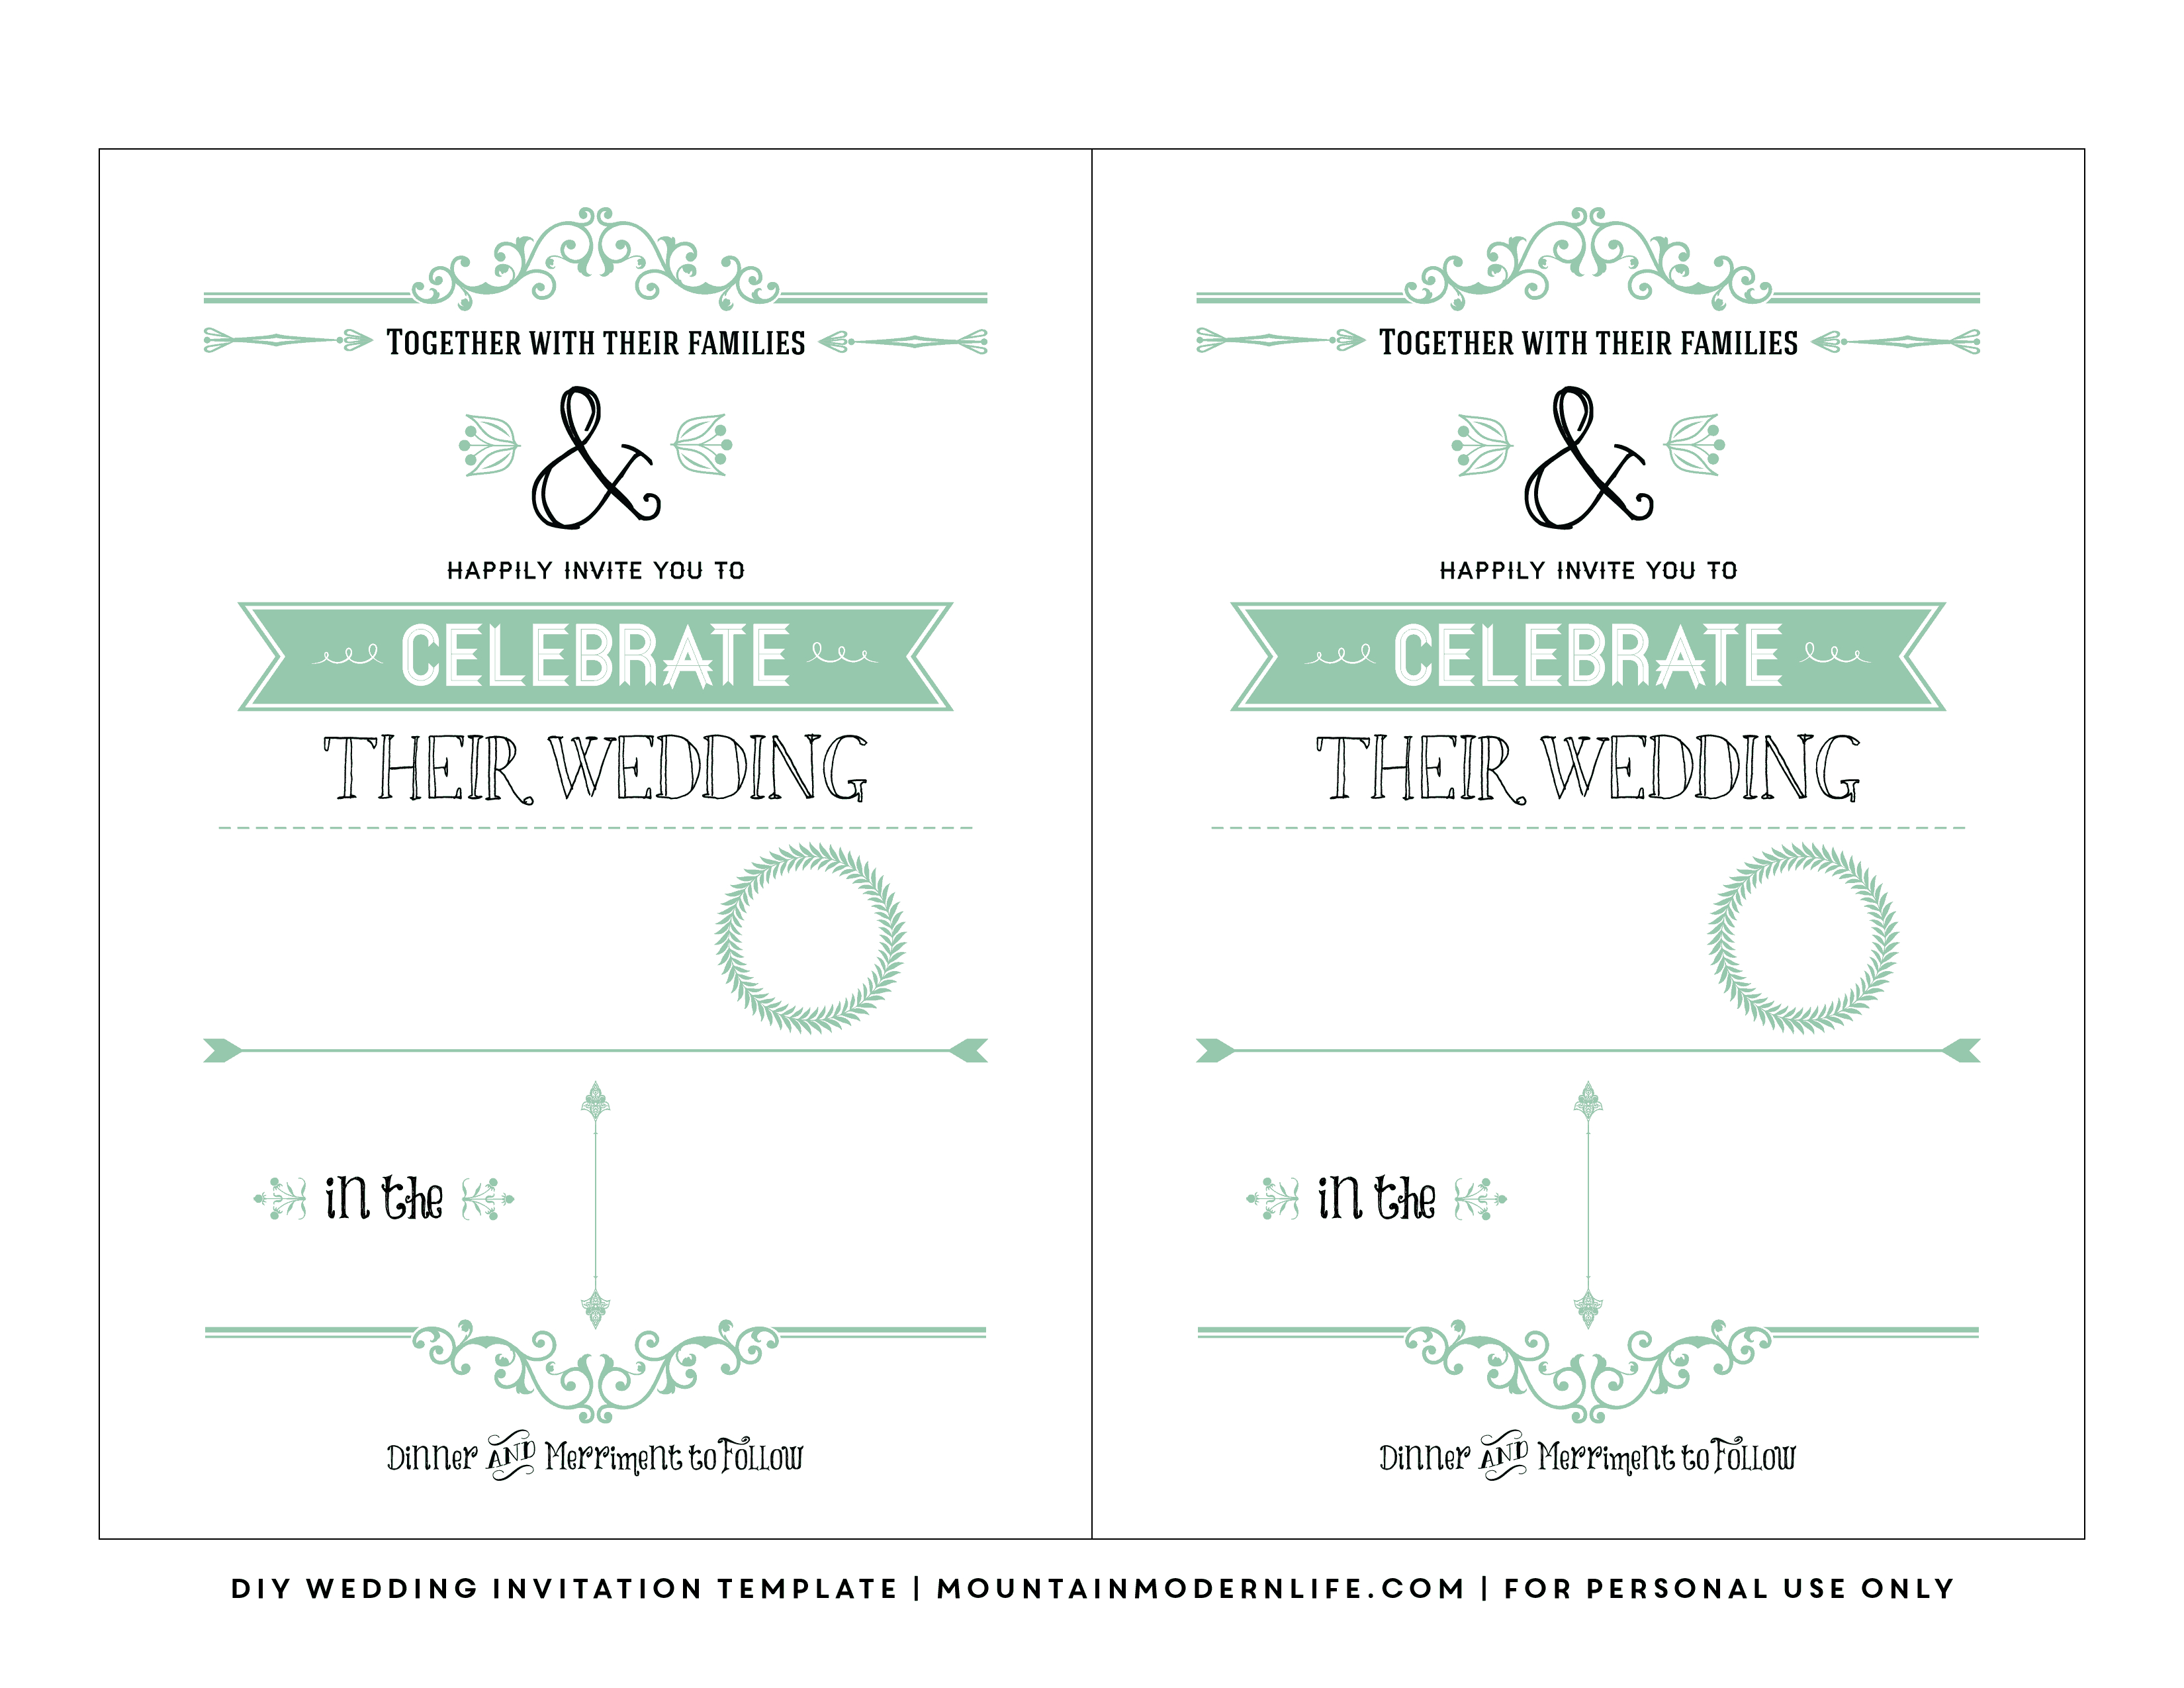 Free Wedding Invitation Template Mountainmodernlife within size 3300 X 2550